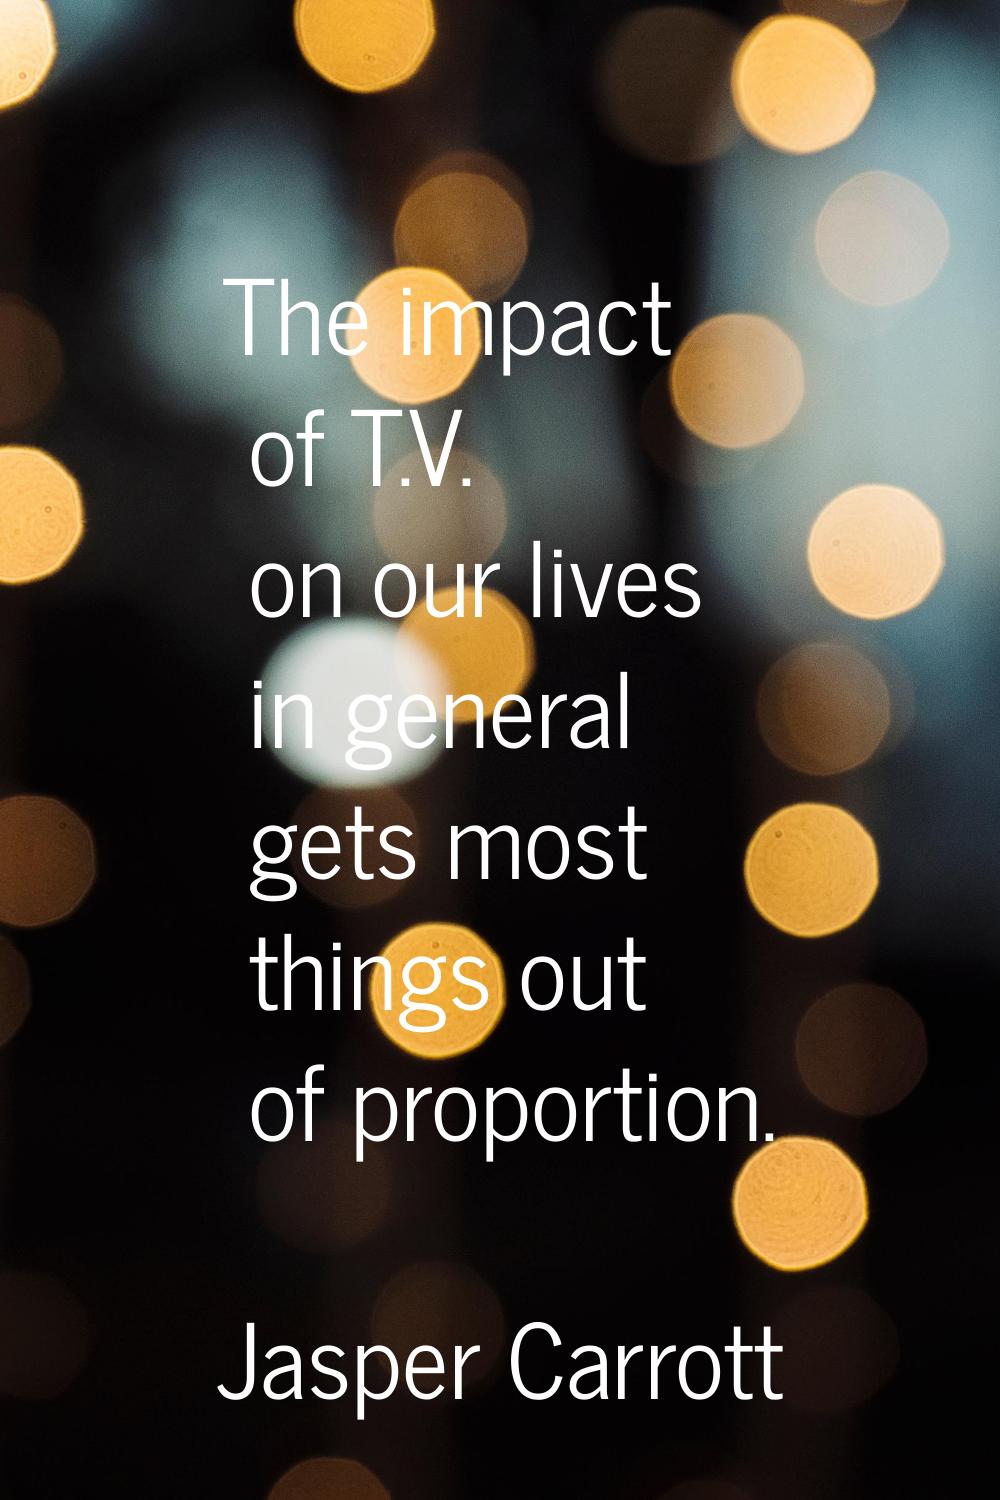 The impact of T.V. on our lives in general gets most things out of proportion.